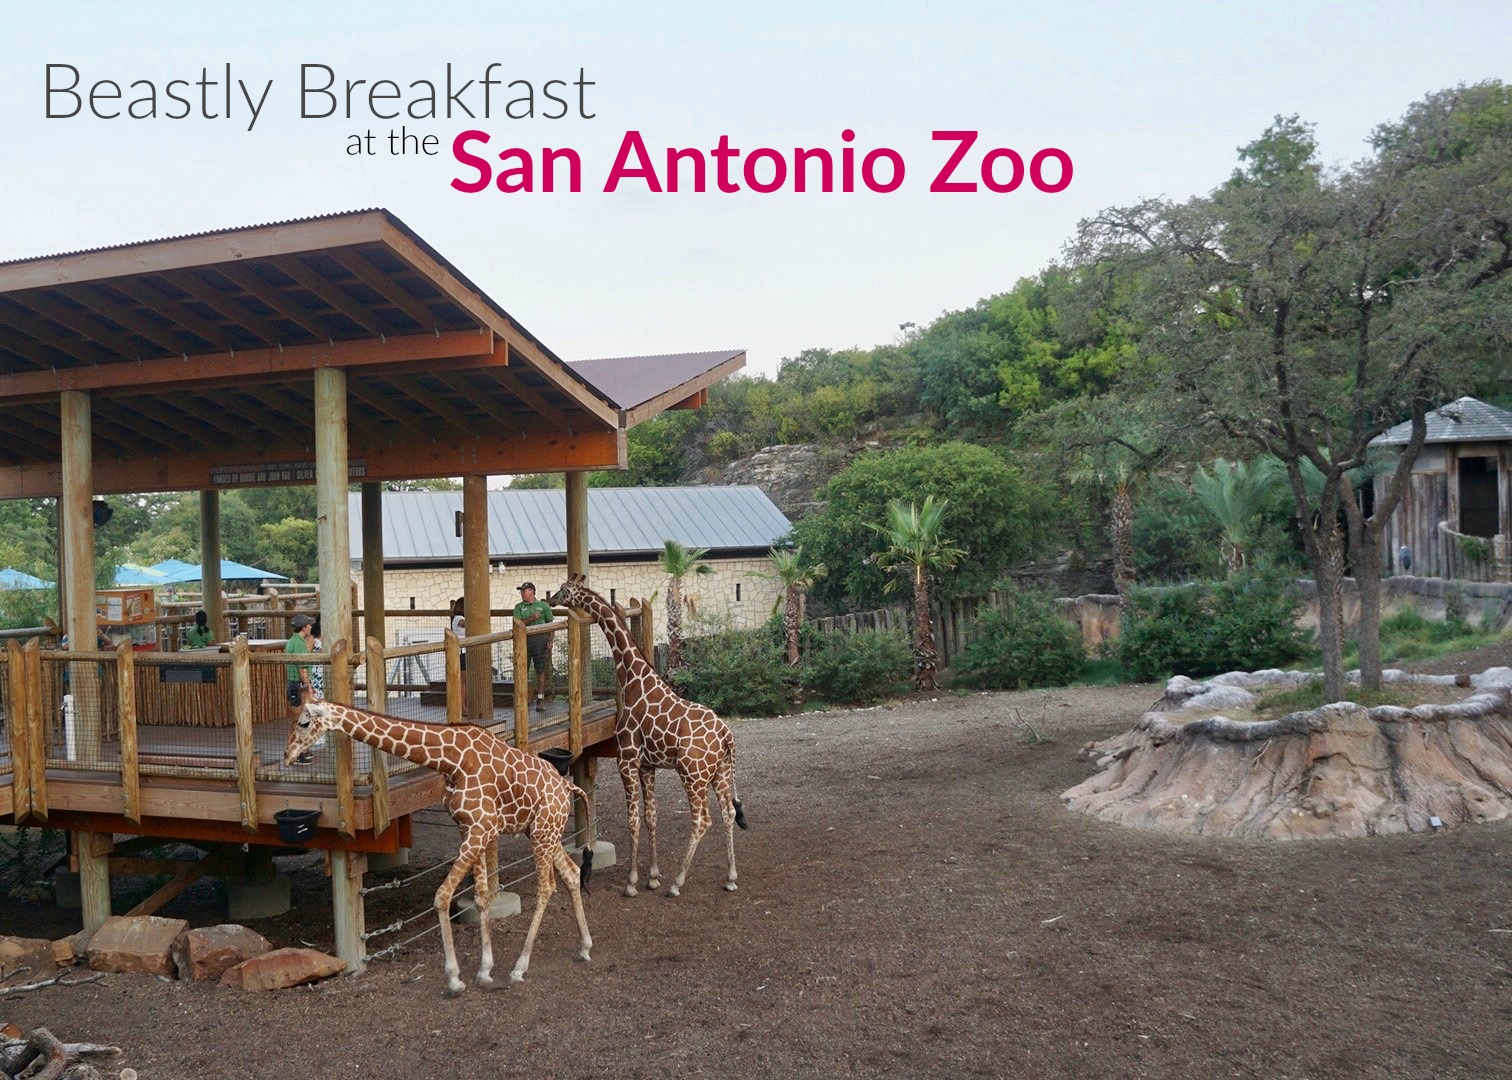 Breakfast with Giraffes at the San Antonio Zoo - Family Love In My City